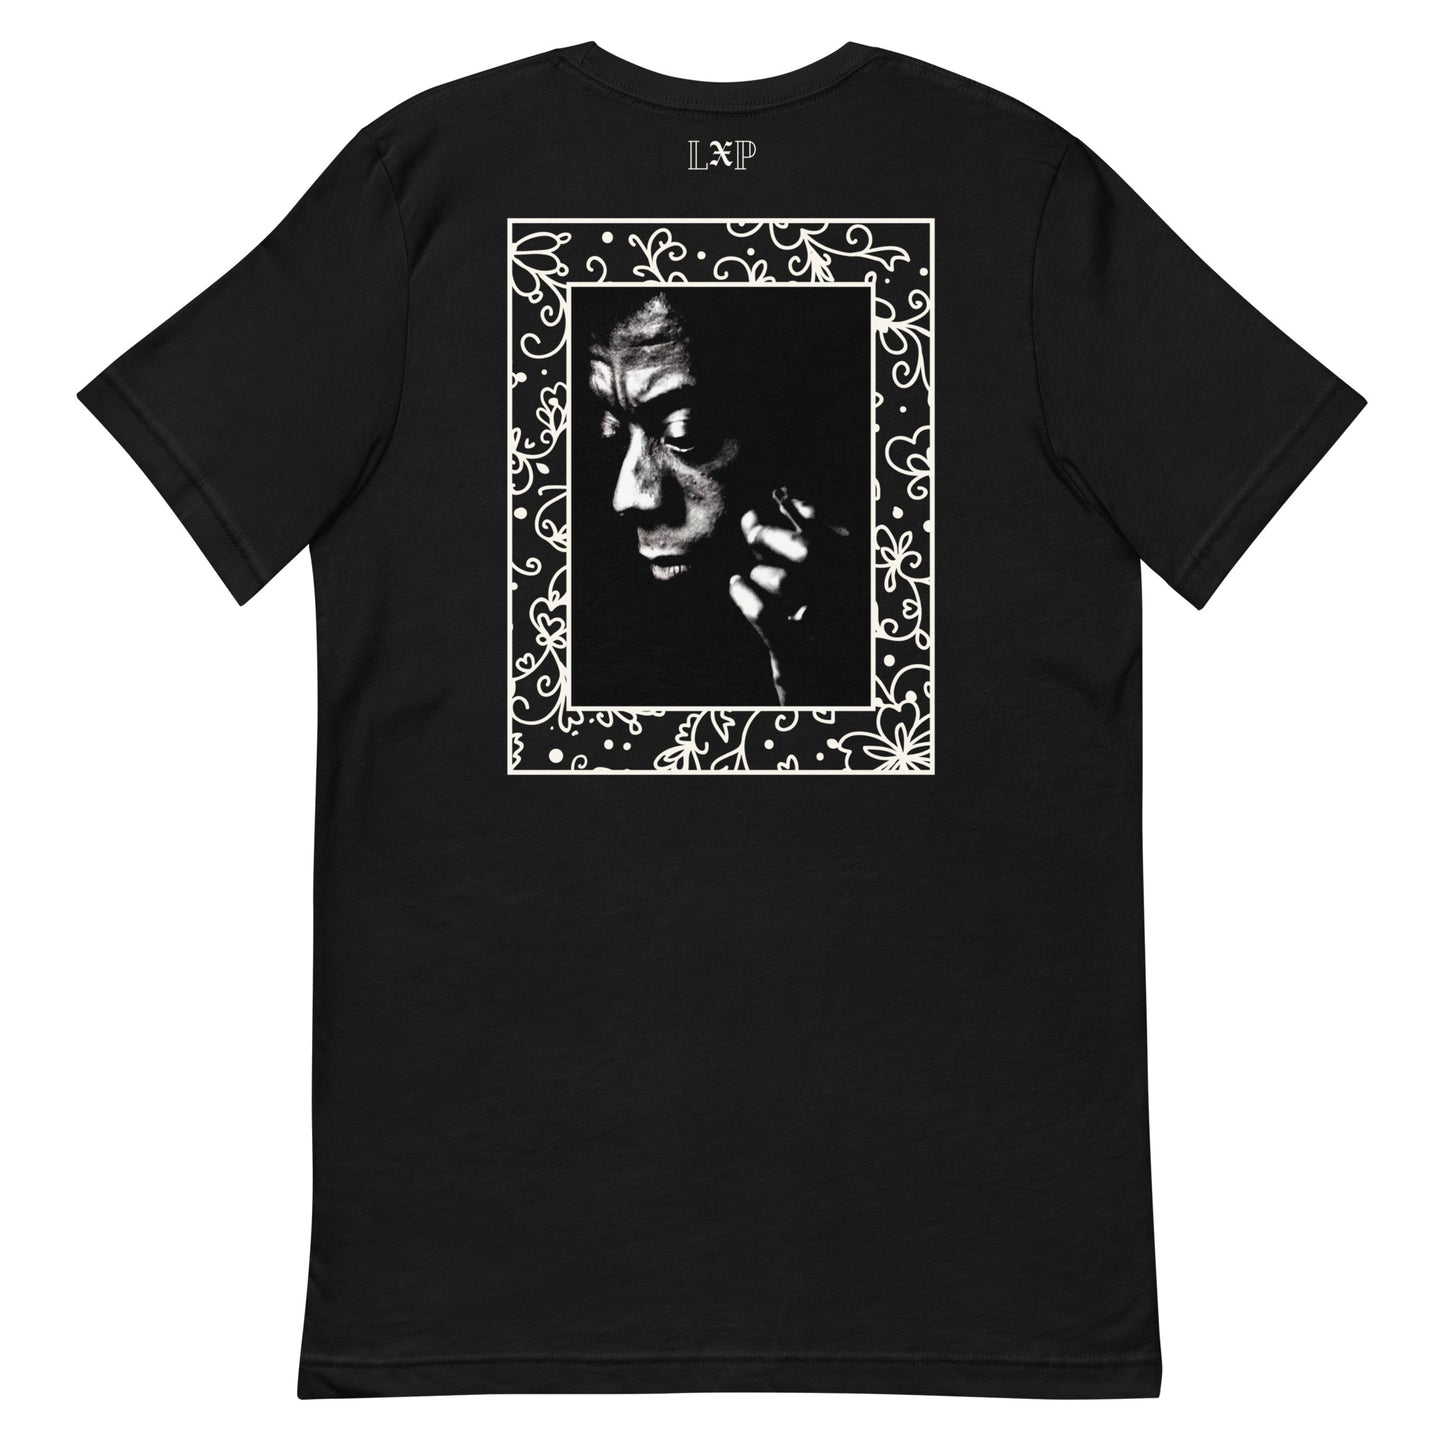 For these are all our children - James Baldwin Tee